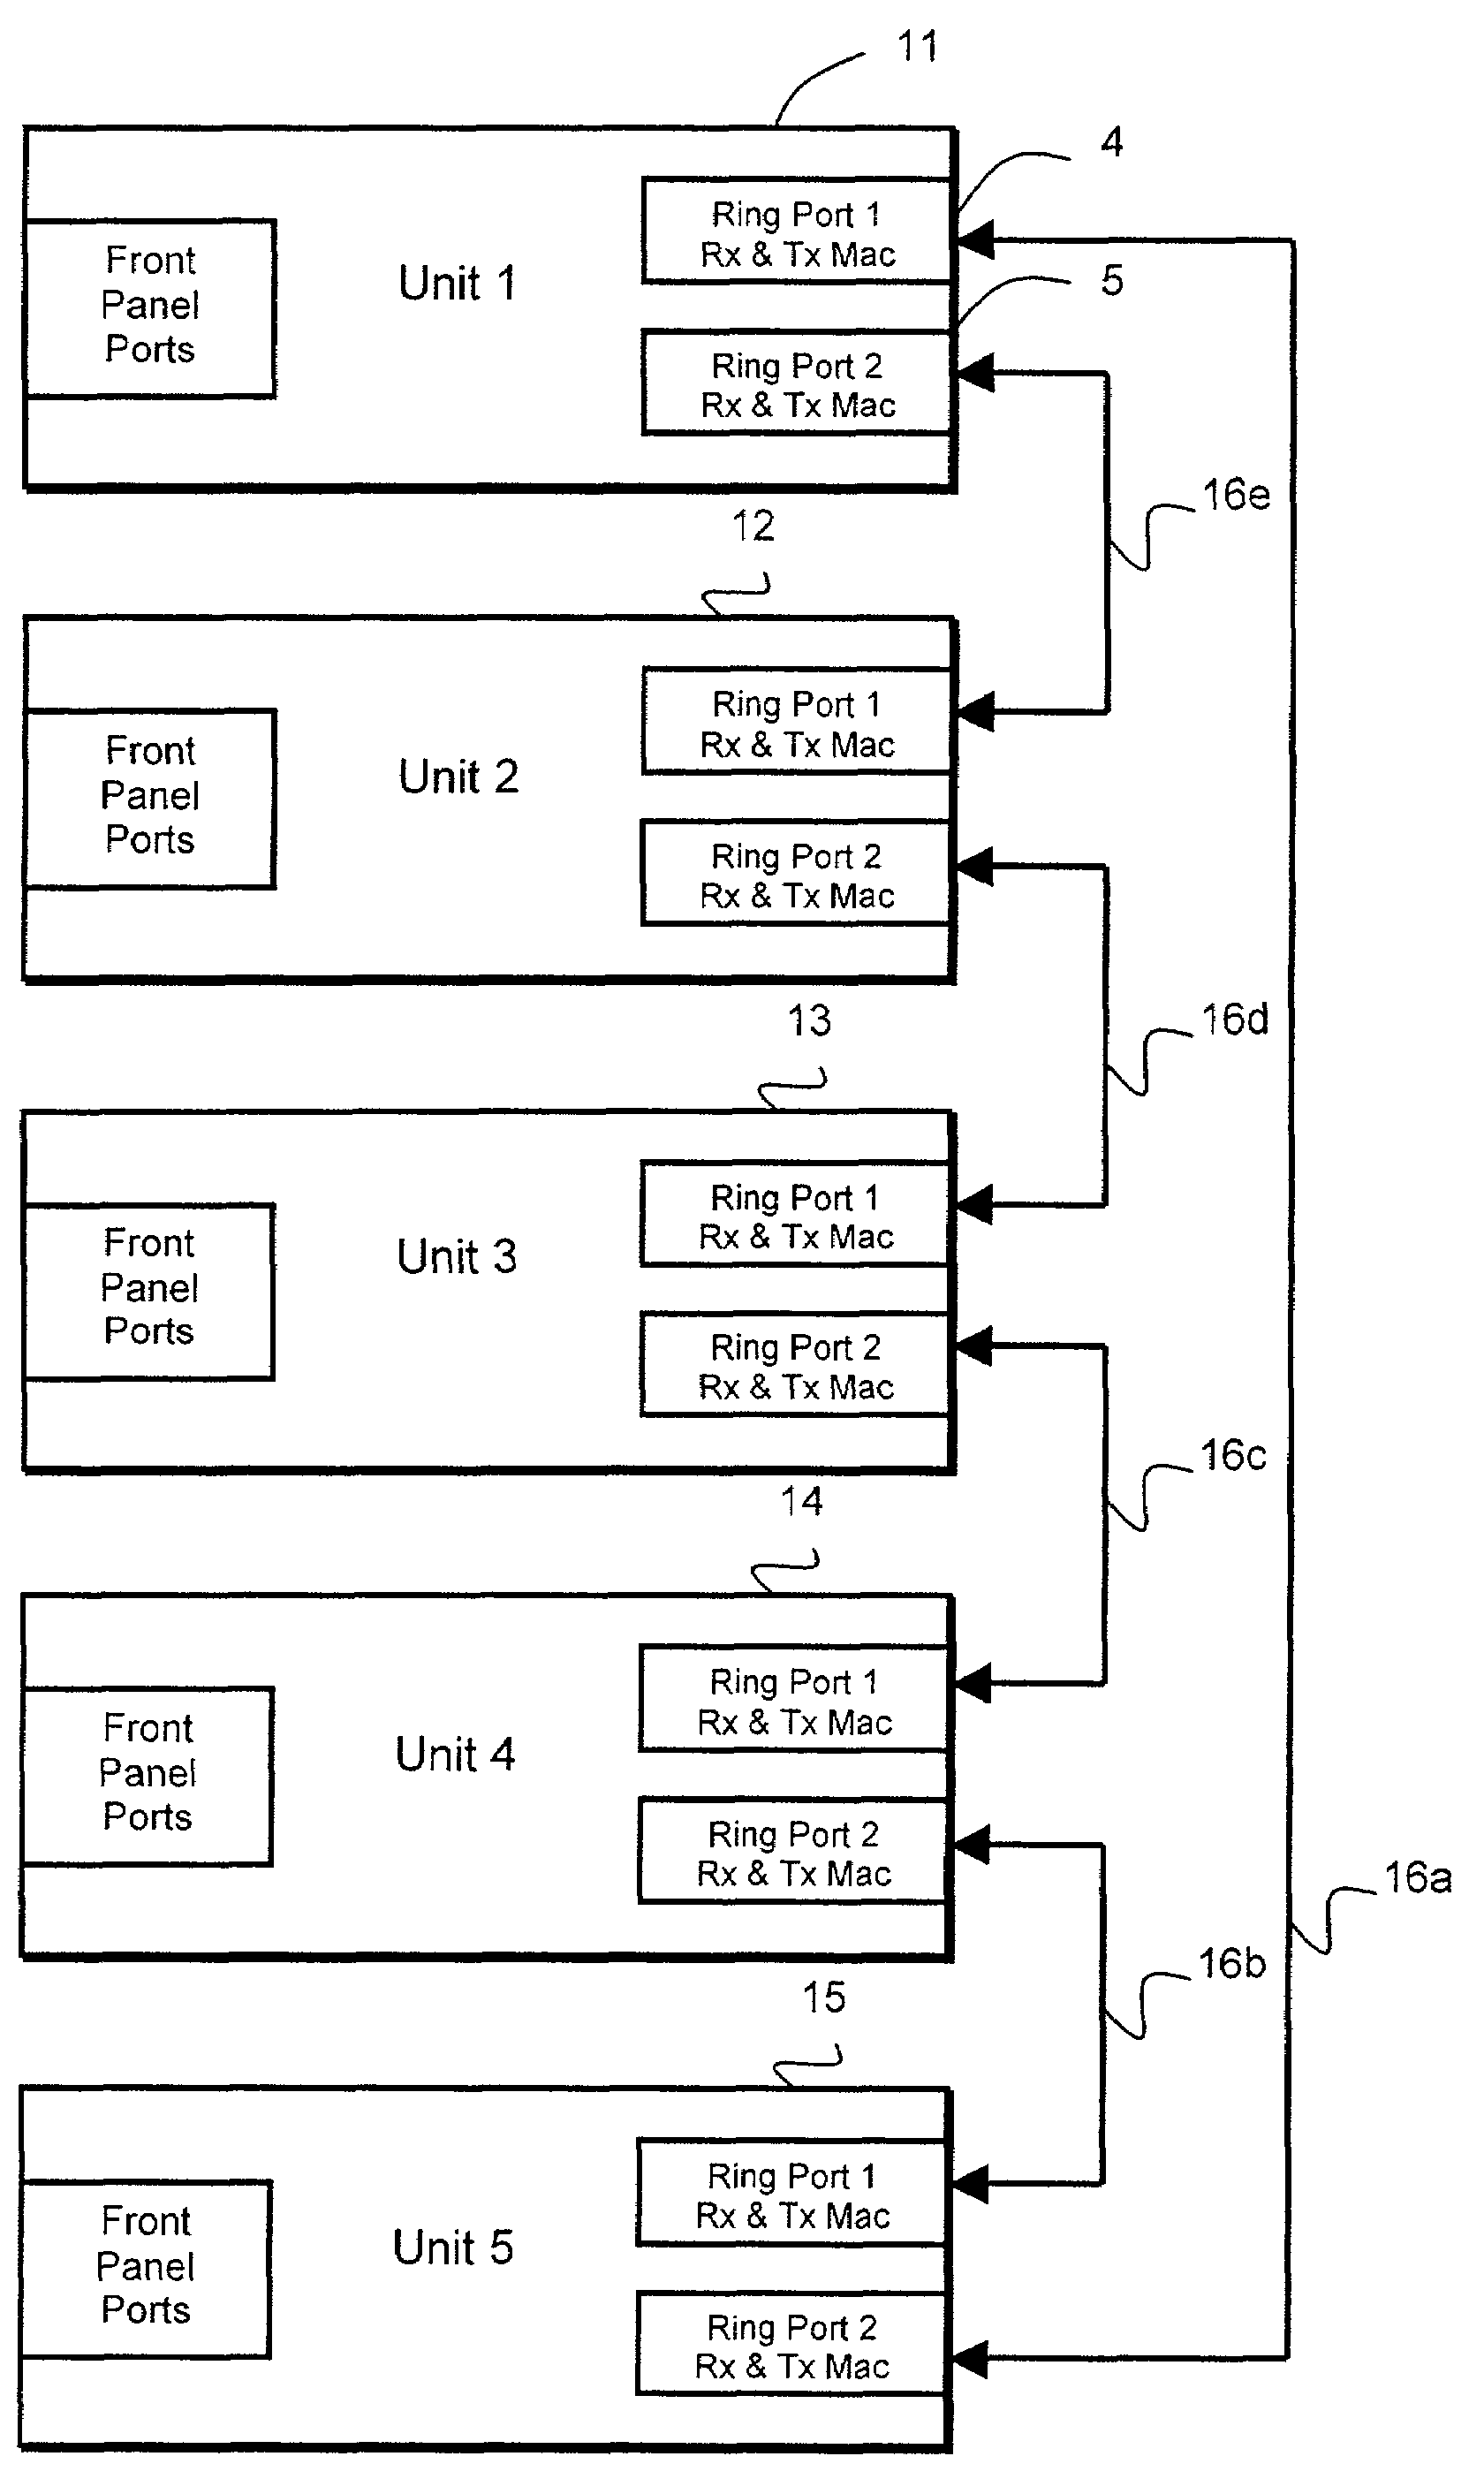 Ethernet units adapted for loop configuration and method of operating same